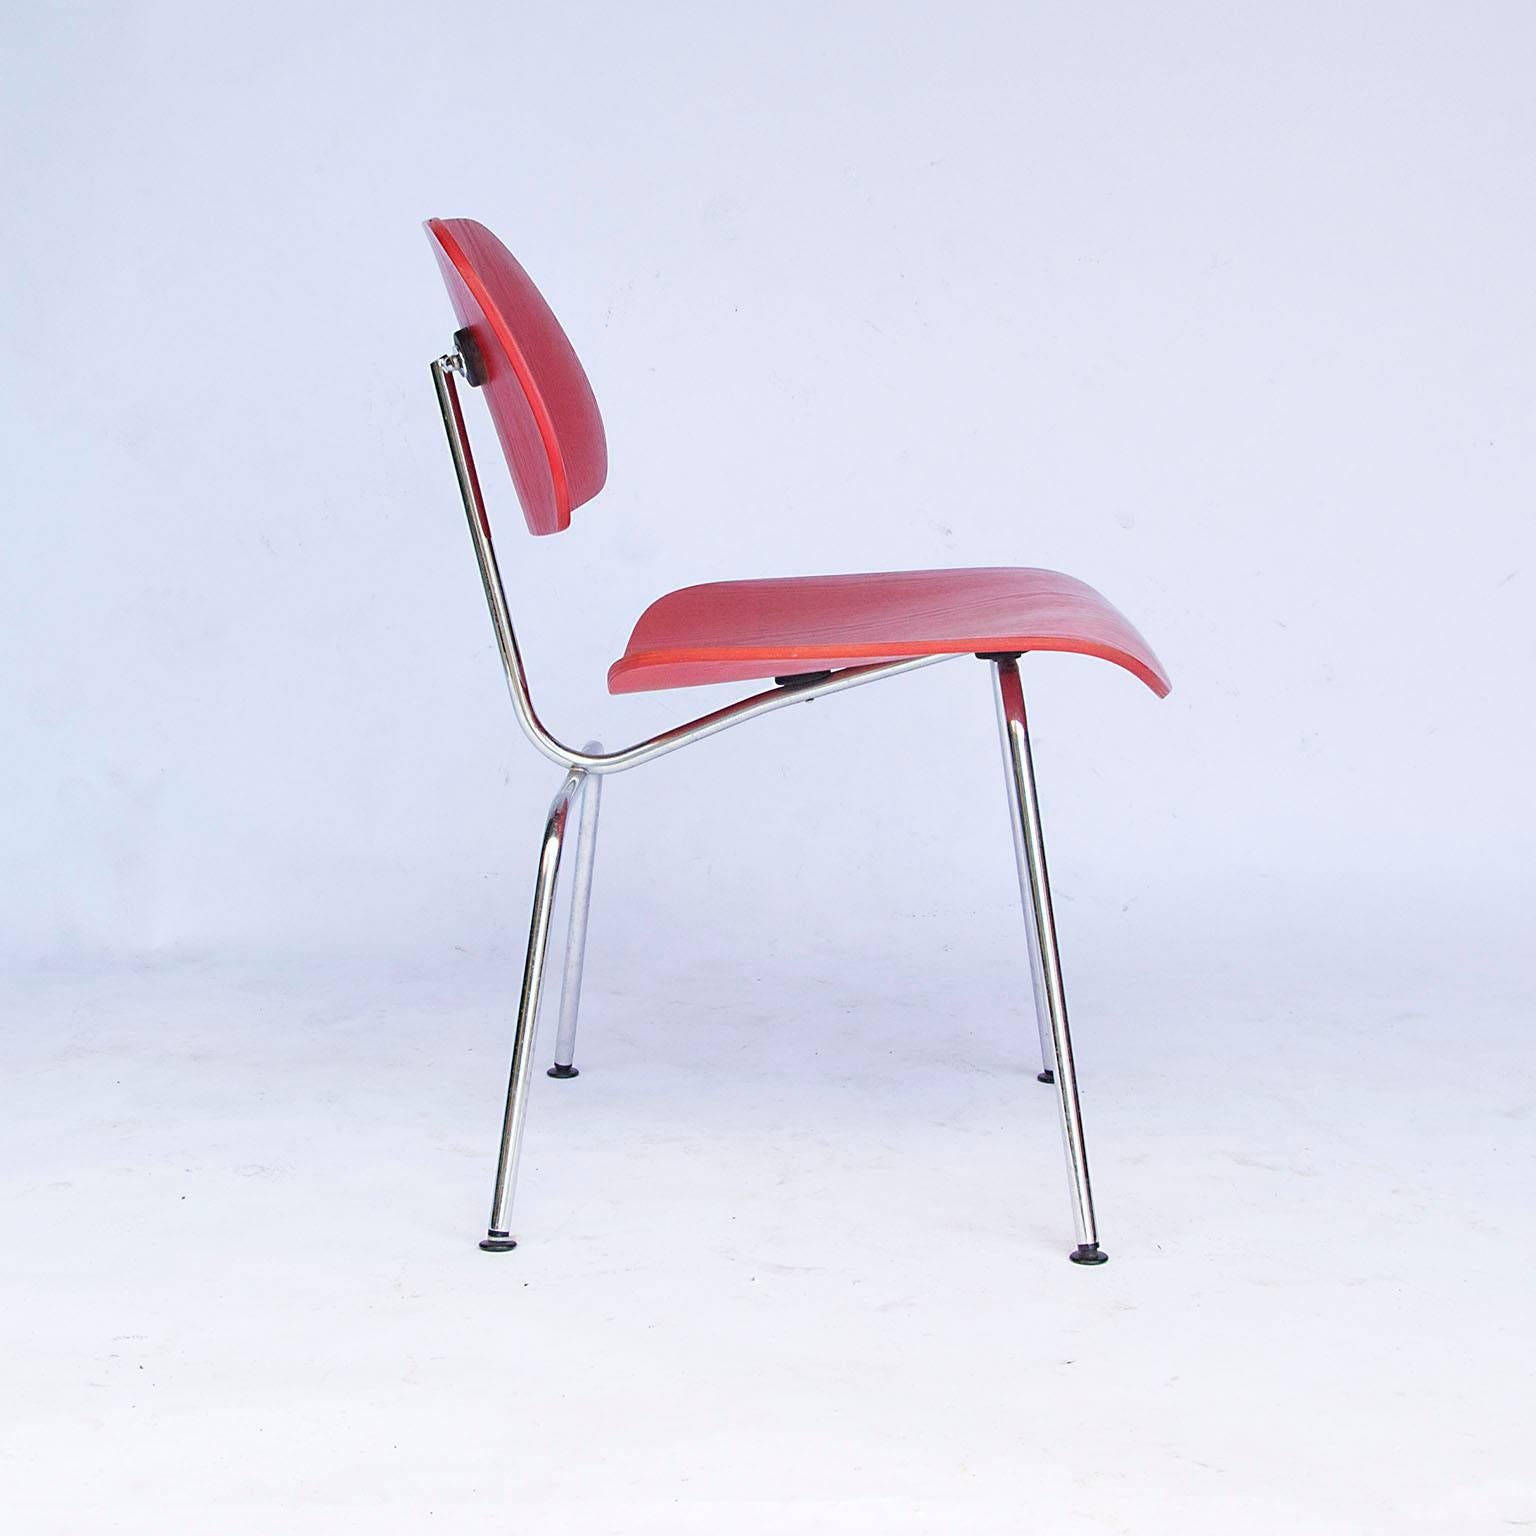 Introduced in the fall of 1946, the Eames DCM (Dining Chair Metal), five kilogram, quickly became an American design Classic. Its seat and back are molded to fit the contours of every body and its attached rubber mounts allow the chair to flex and